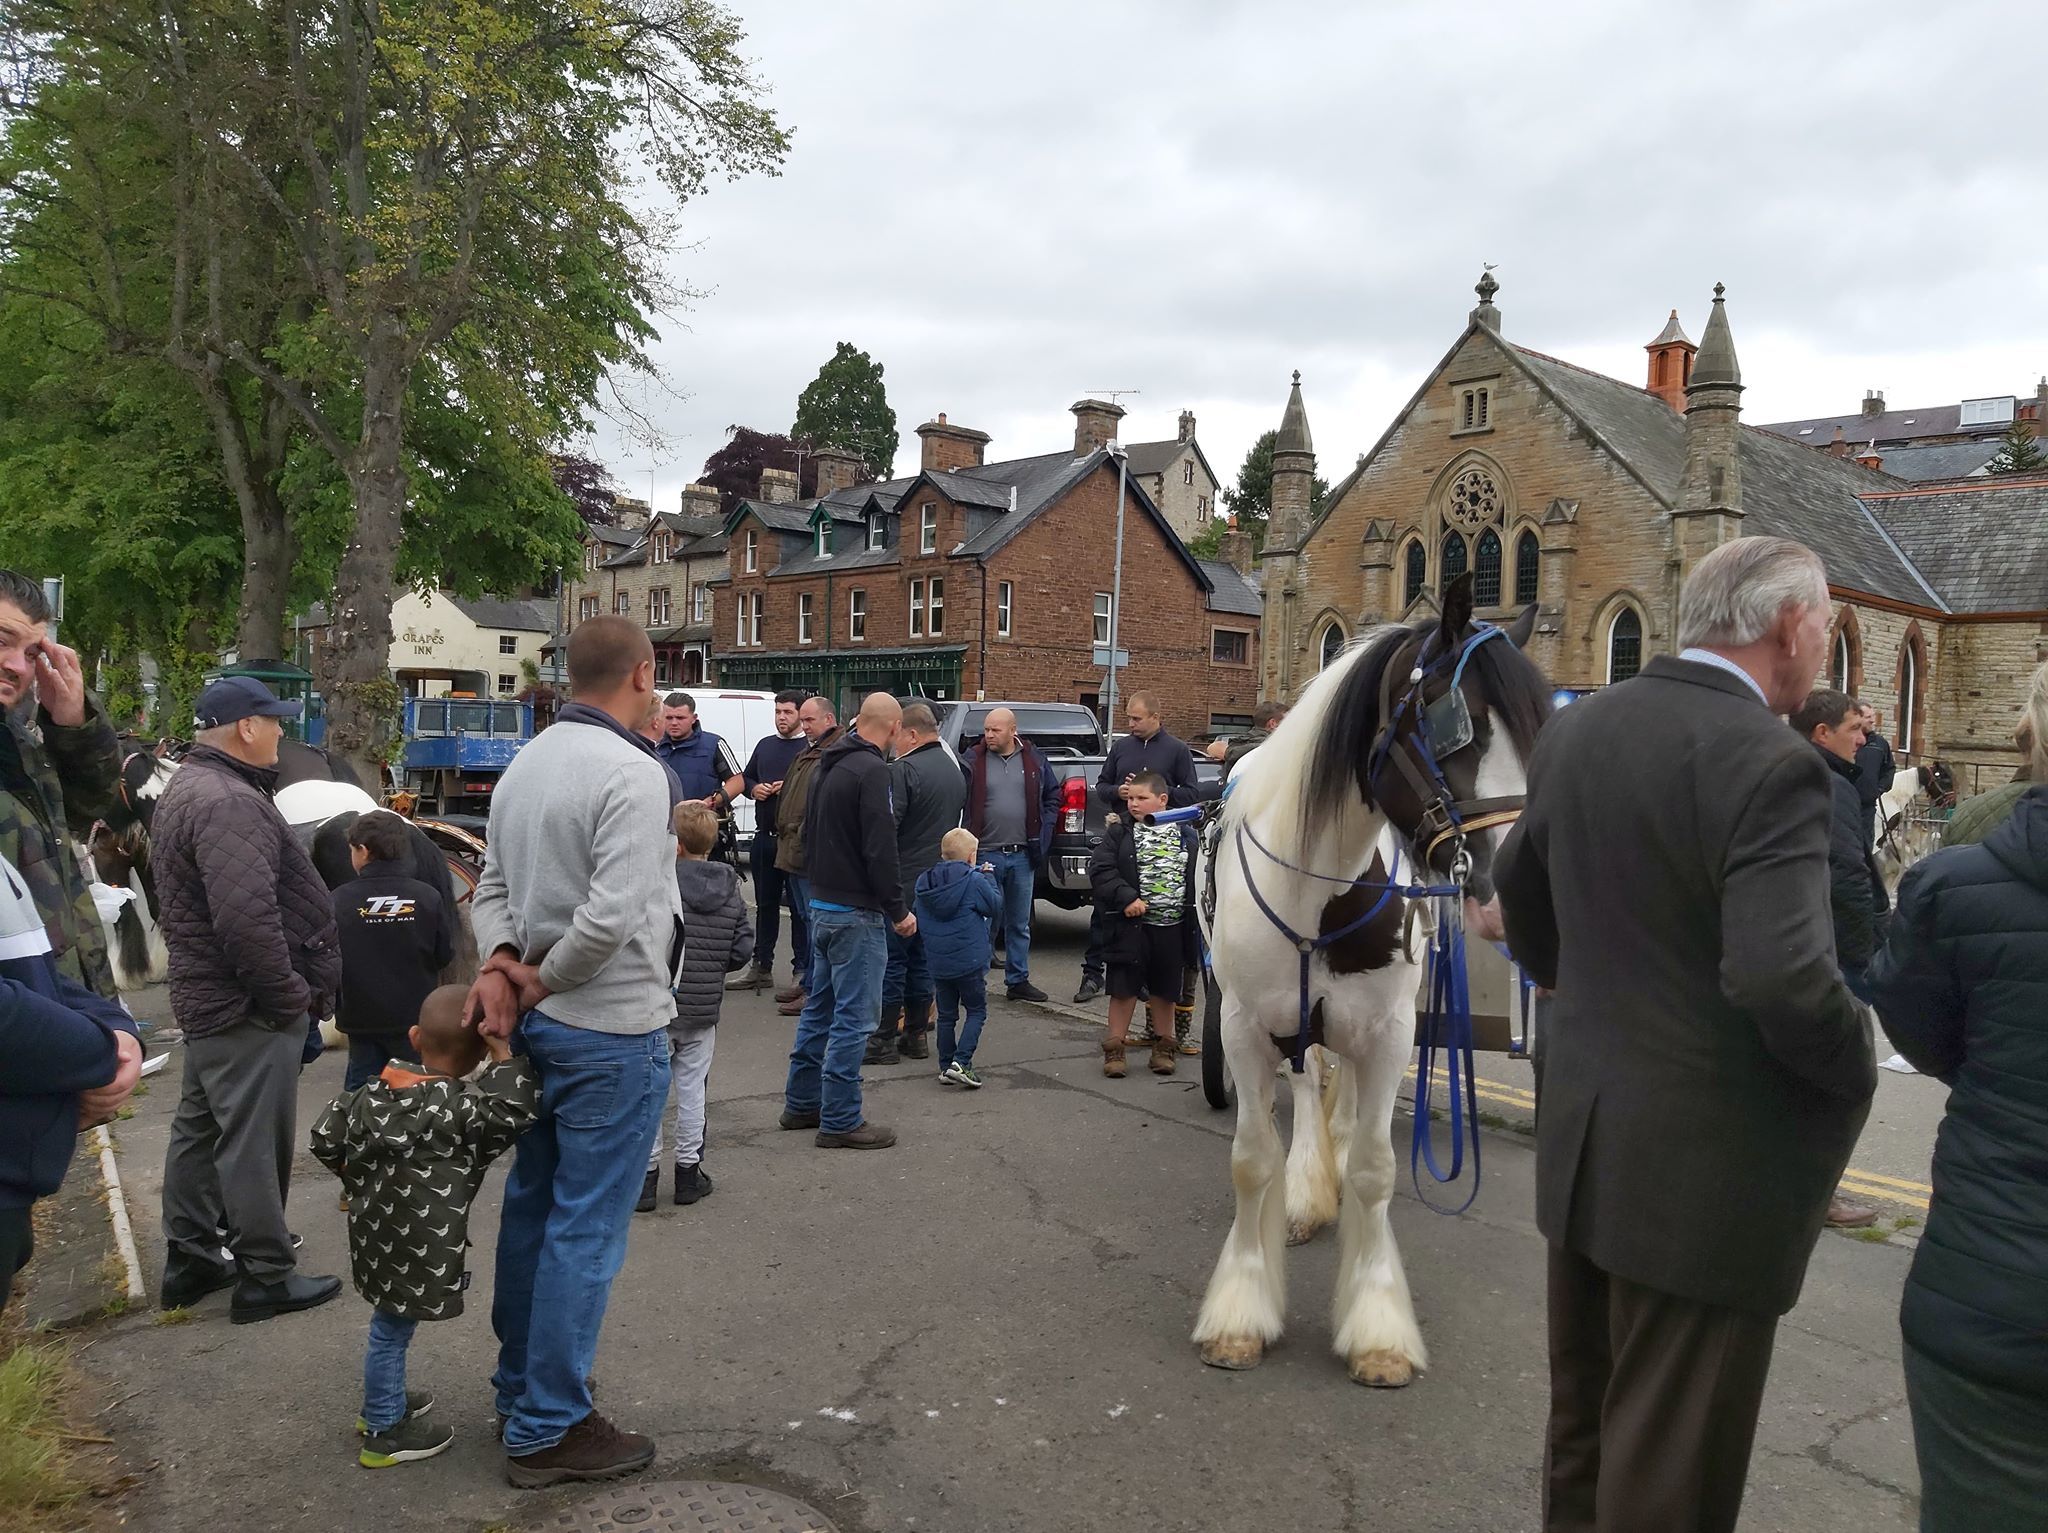 Scores of travellers arrived in Appleby this weekend even though the annual horse fair had been cancelled. June 7, 2020. 